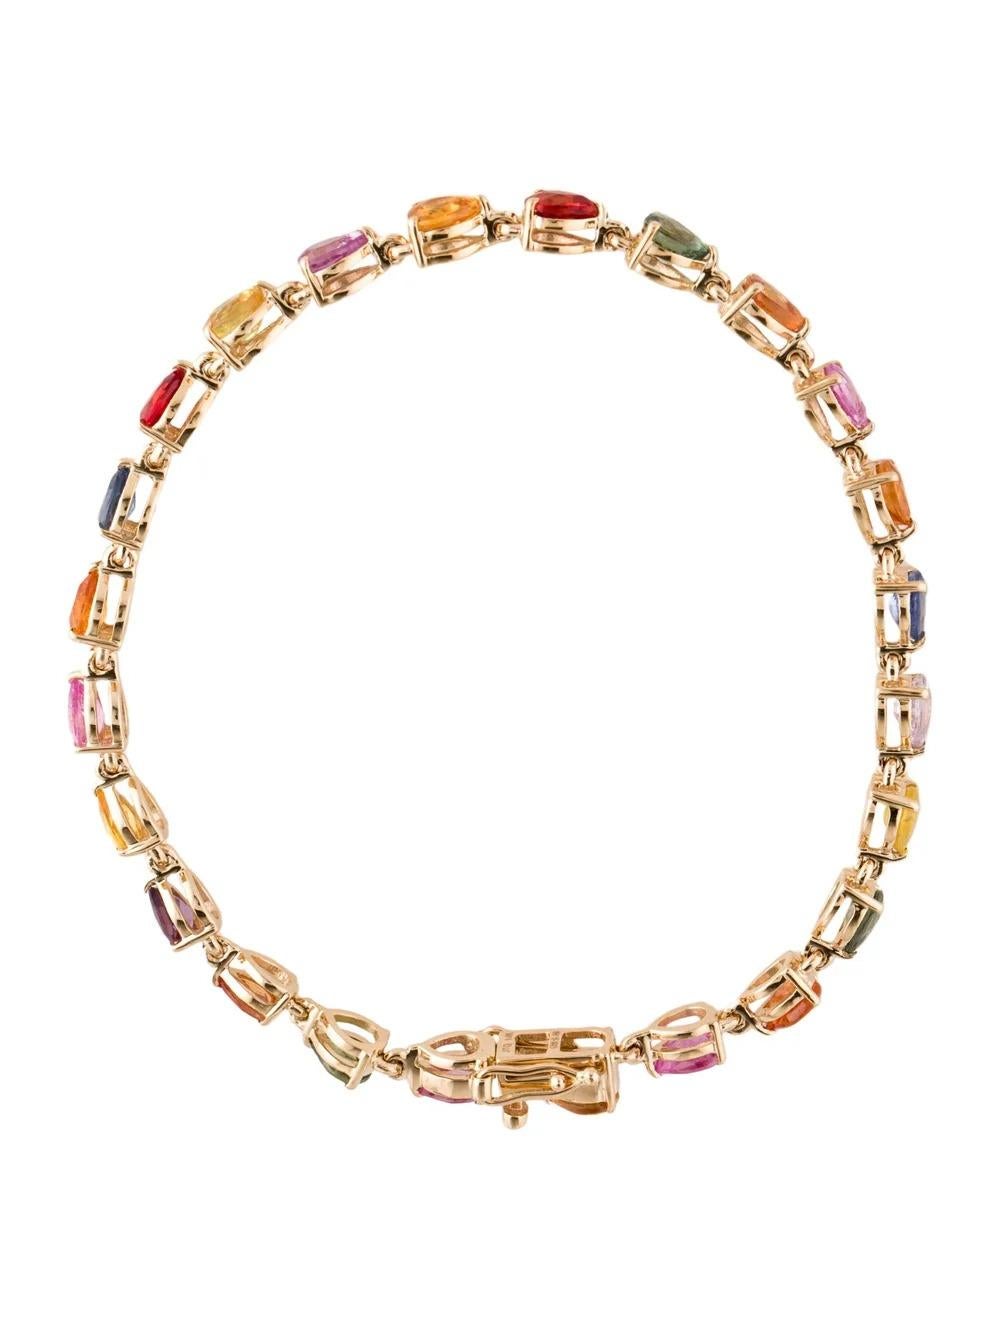 Immerse yourself in the allure of our captivating 14K Yellow Gold Multicolor Sapphire Link Bracelet, featuring a breathtaking 9.49 Carat Pear Modified Brilliant Sapphire. Crafted with exquisite attention to detail, this bracelet is a true statement